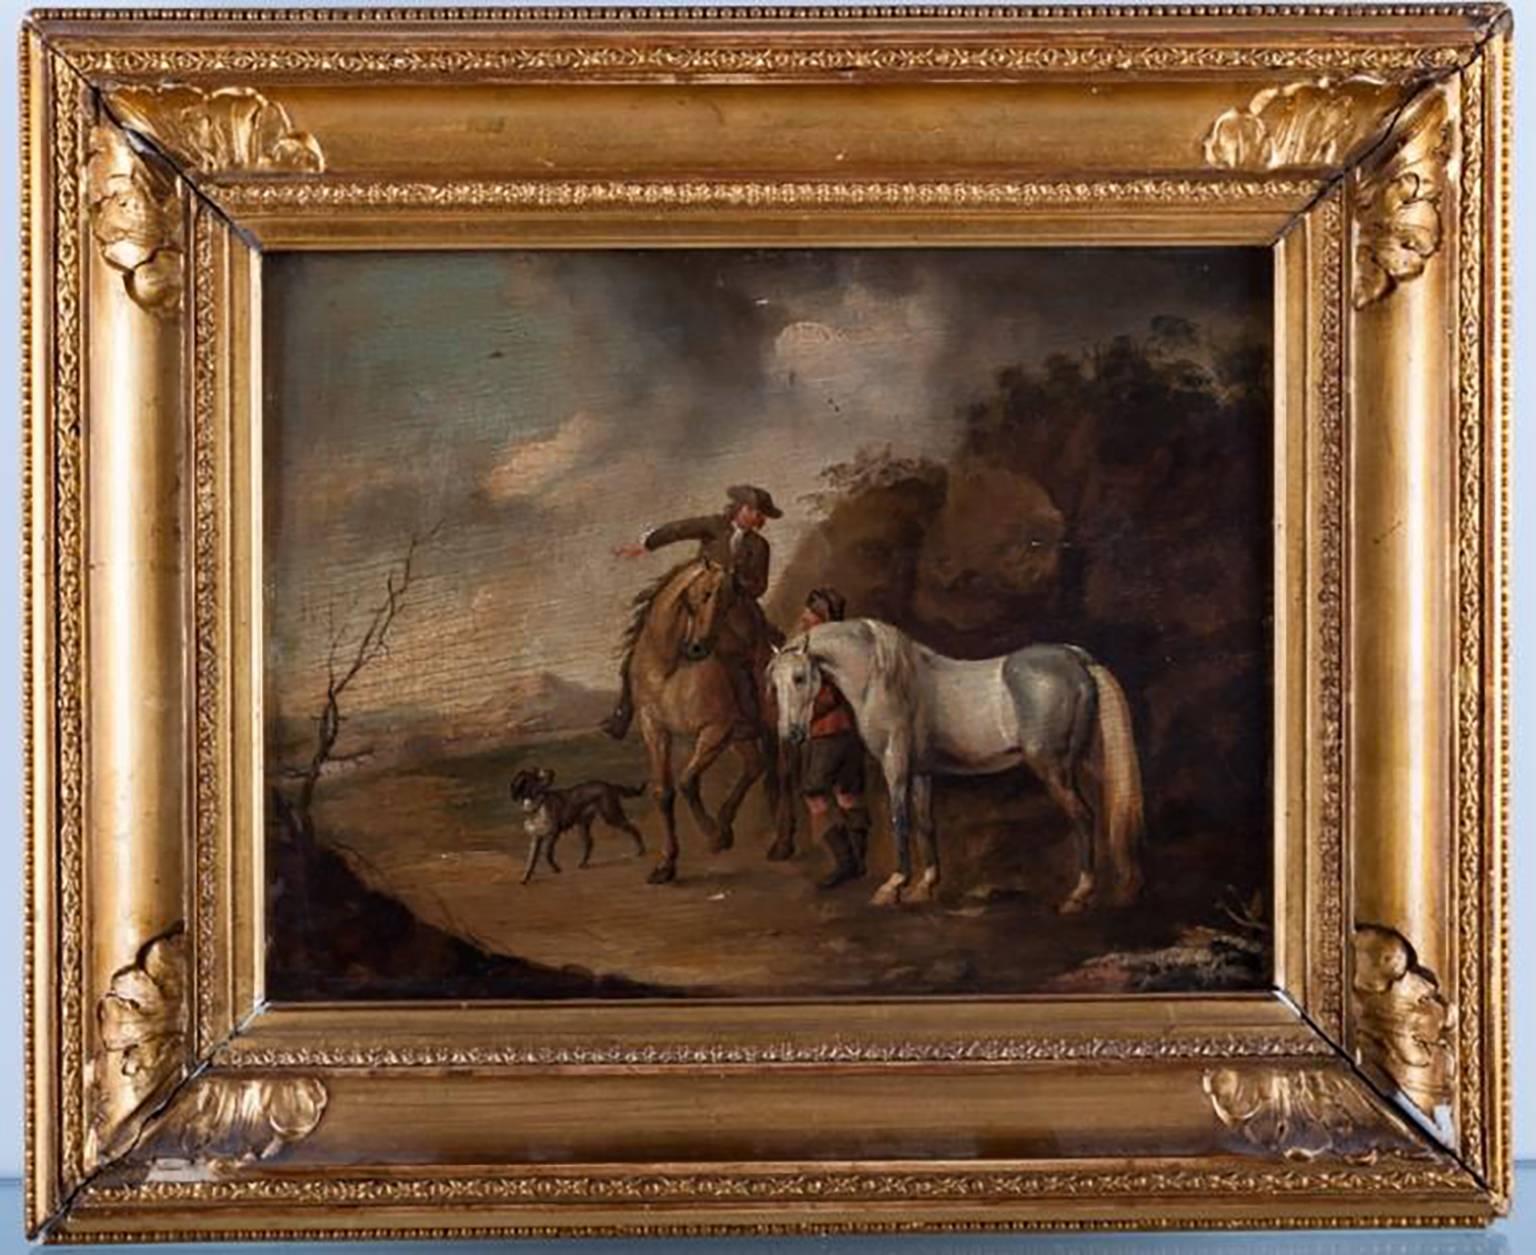 18th Century English Landscape Oil Painting by Acclaimed British Royal Academician Francis Wheatley (1747 – 1801)  Entitled “Horses with Riders”  Oil on Board  Depicts two horses and riders with a dog in a landscape  Housed in period possibly